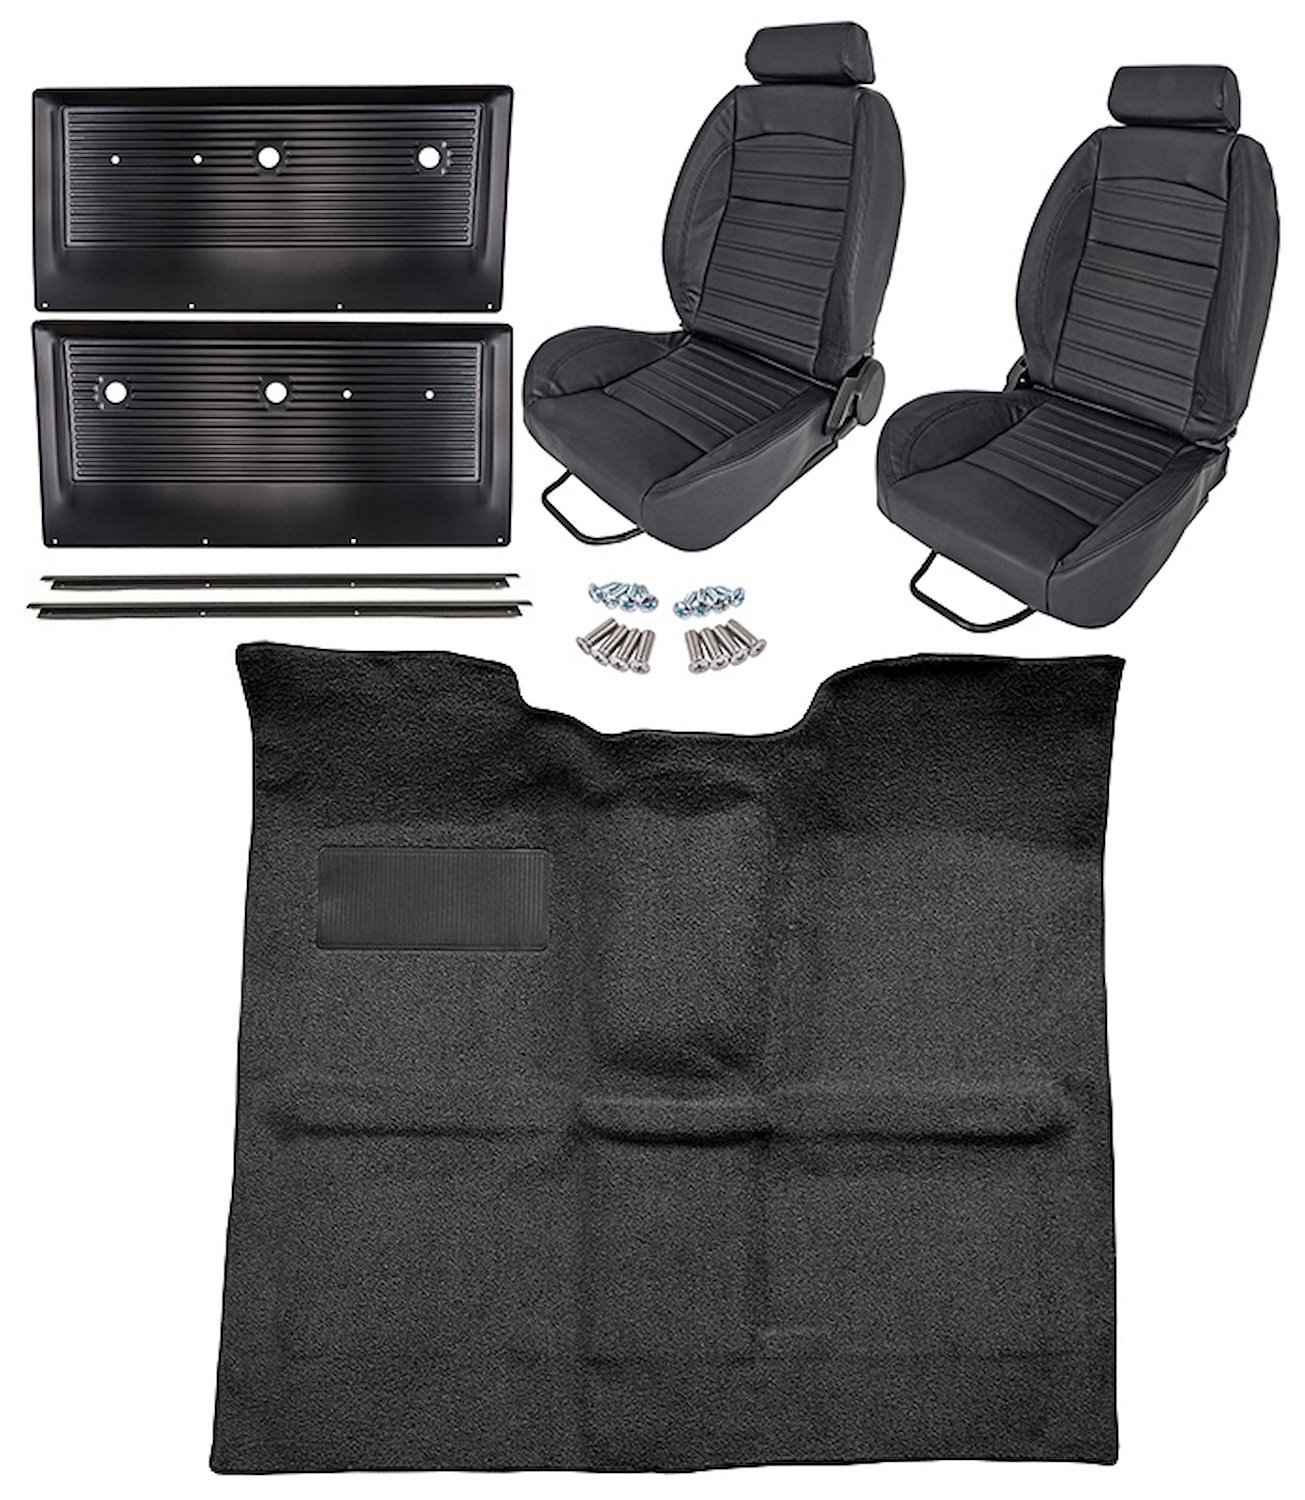 Black Interior Kit w/High-Back Buckets for 1967-1972 GM C Series Regular Cab Truck  w/o Gas Tank in Cab, 4-Speed